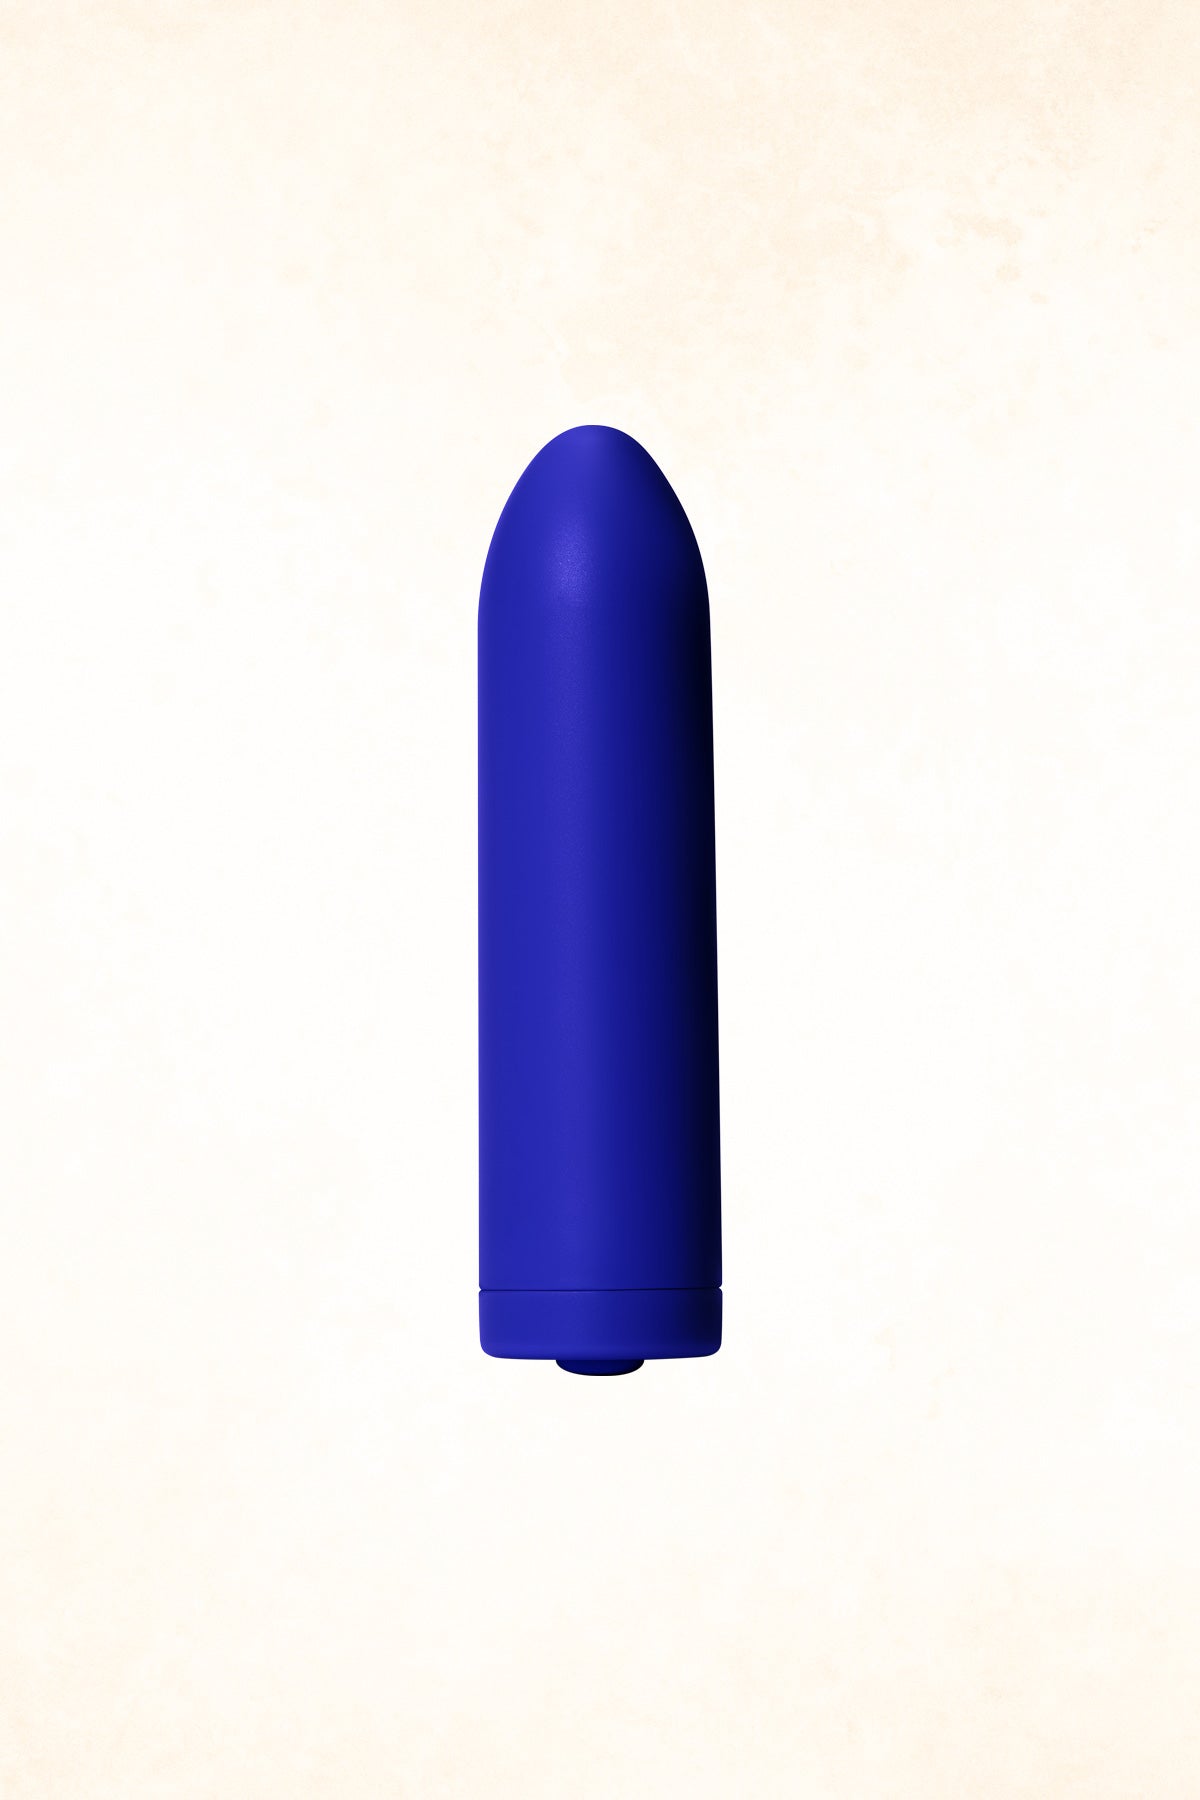 Dame Products - Zee Bullet Vibrator